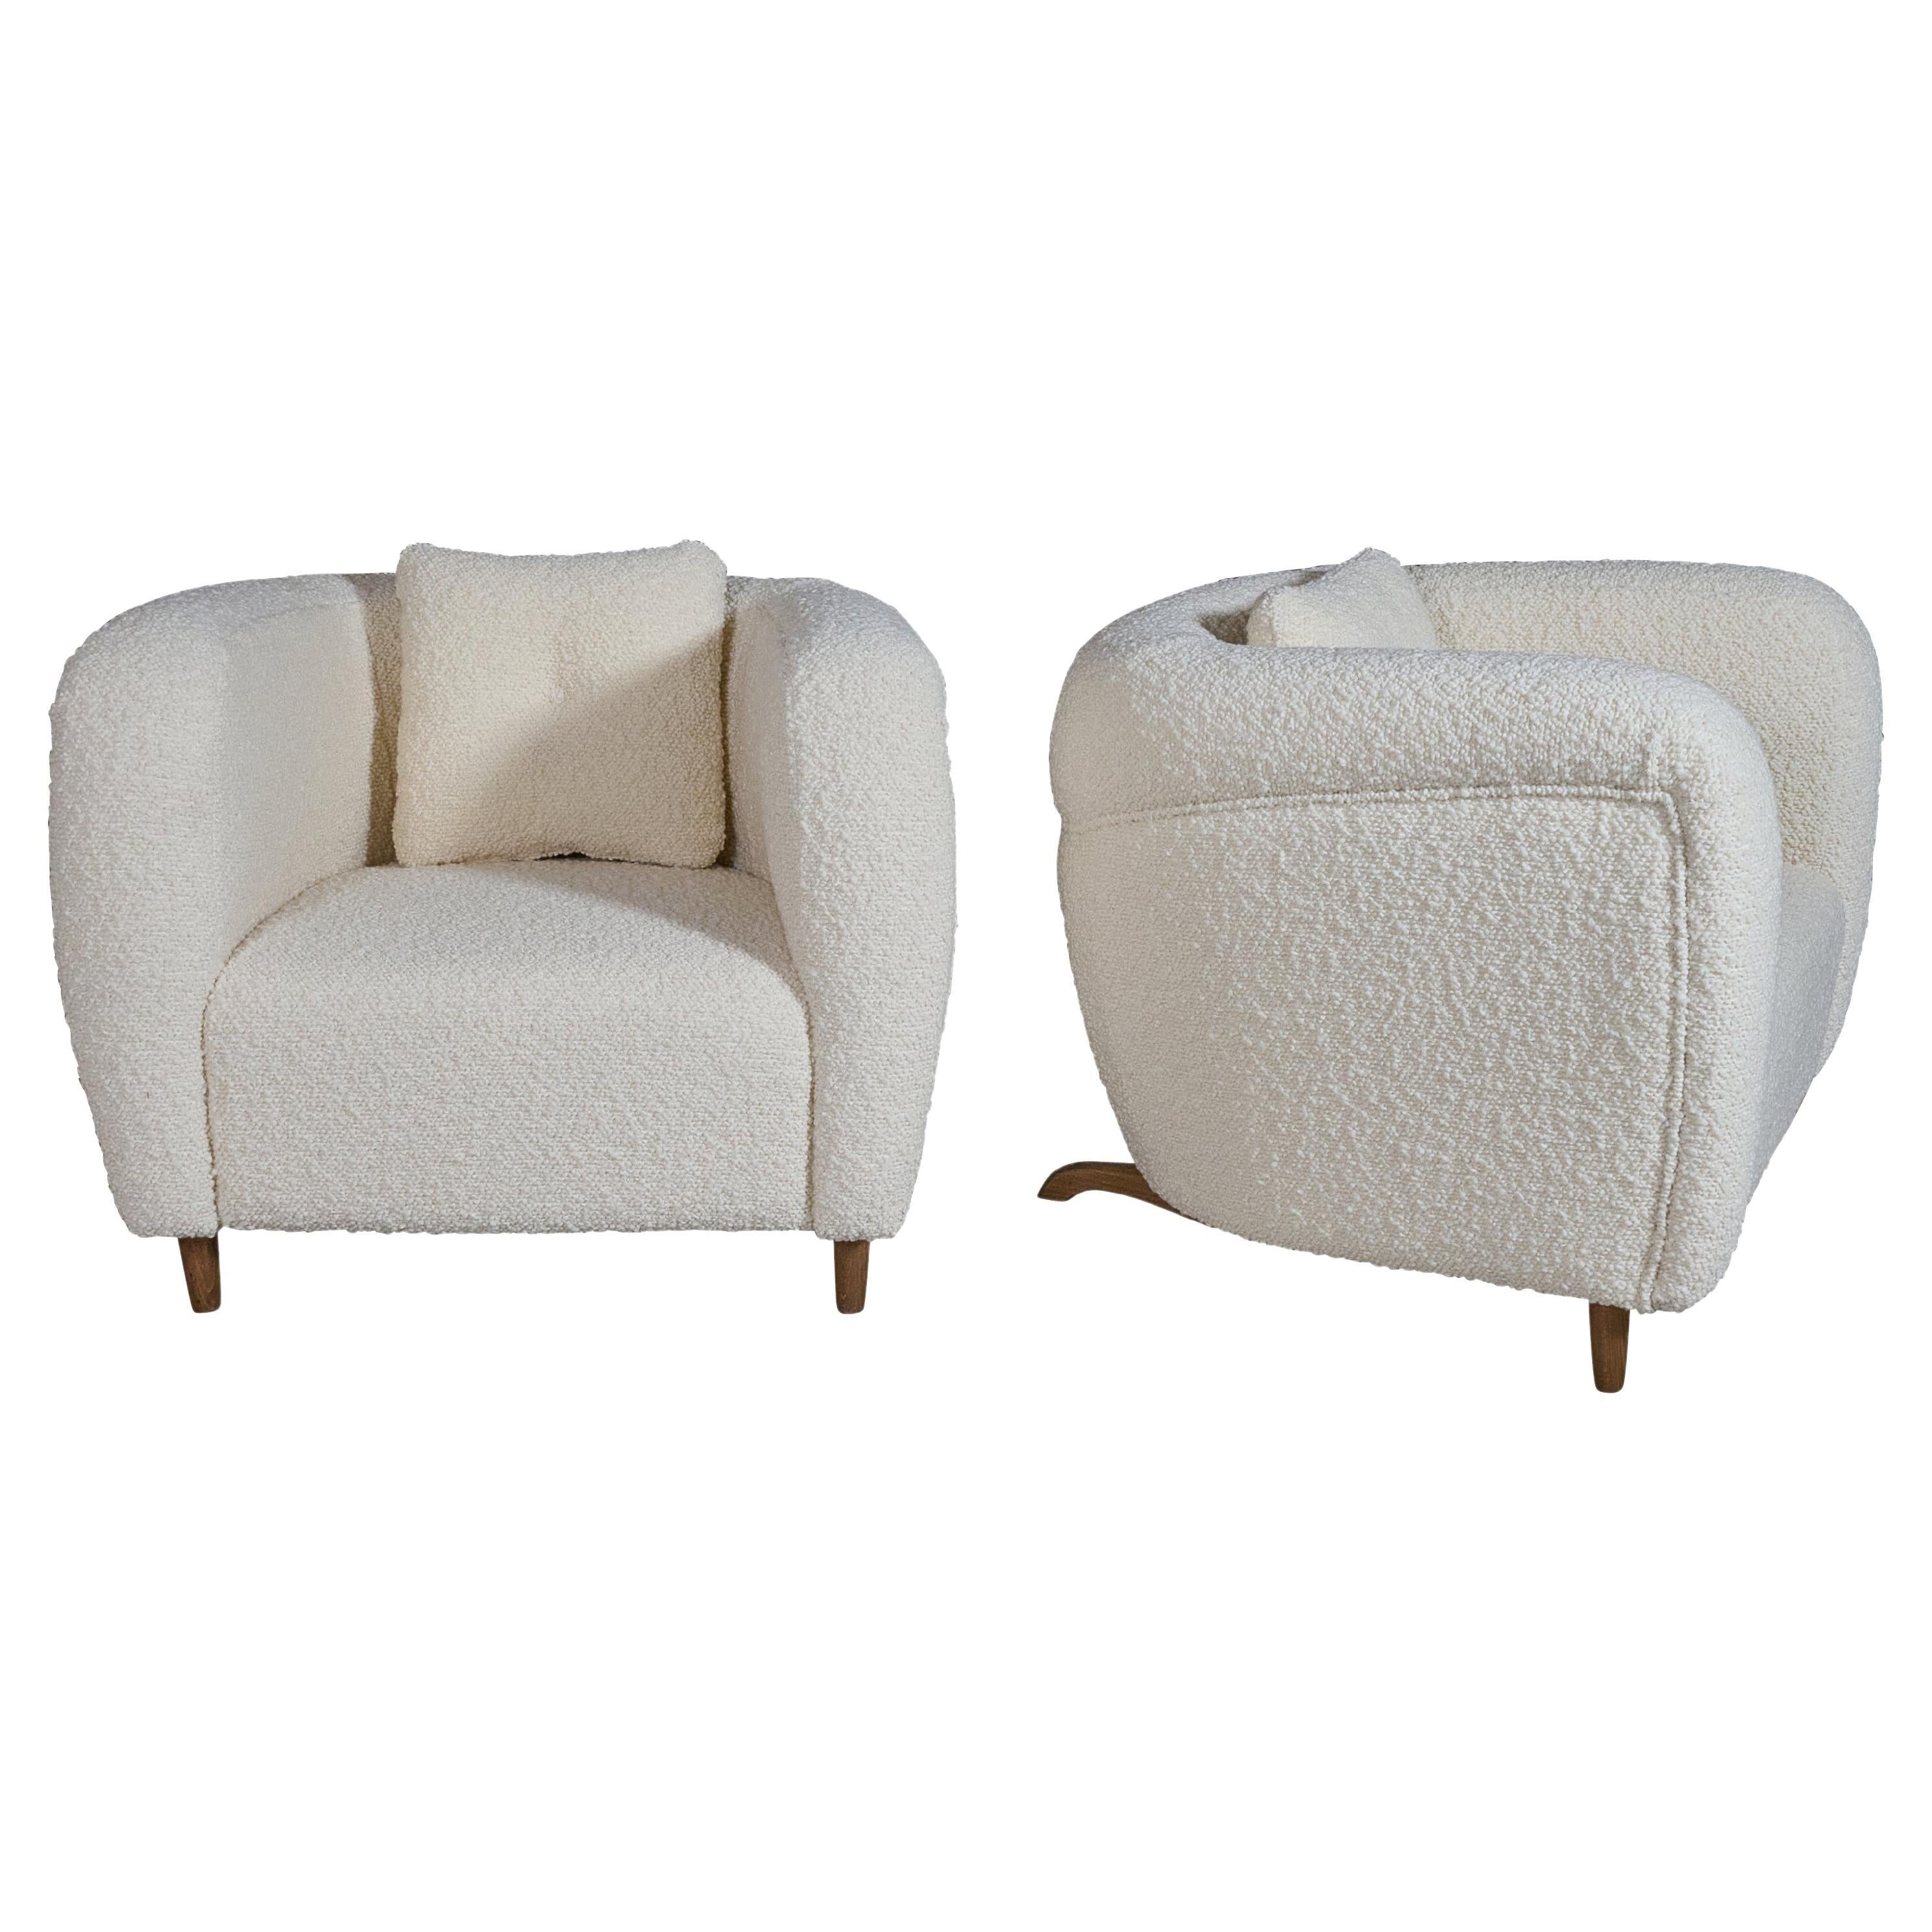 Pair of Boucle Upholstered Chairs